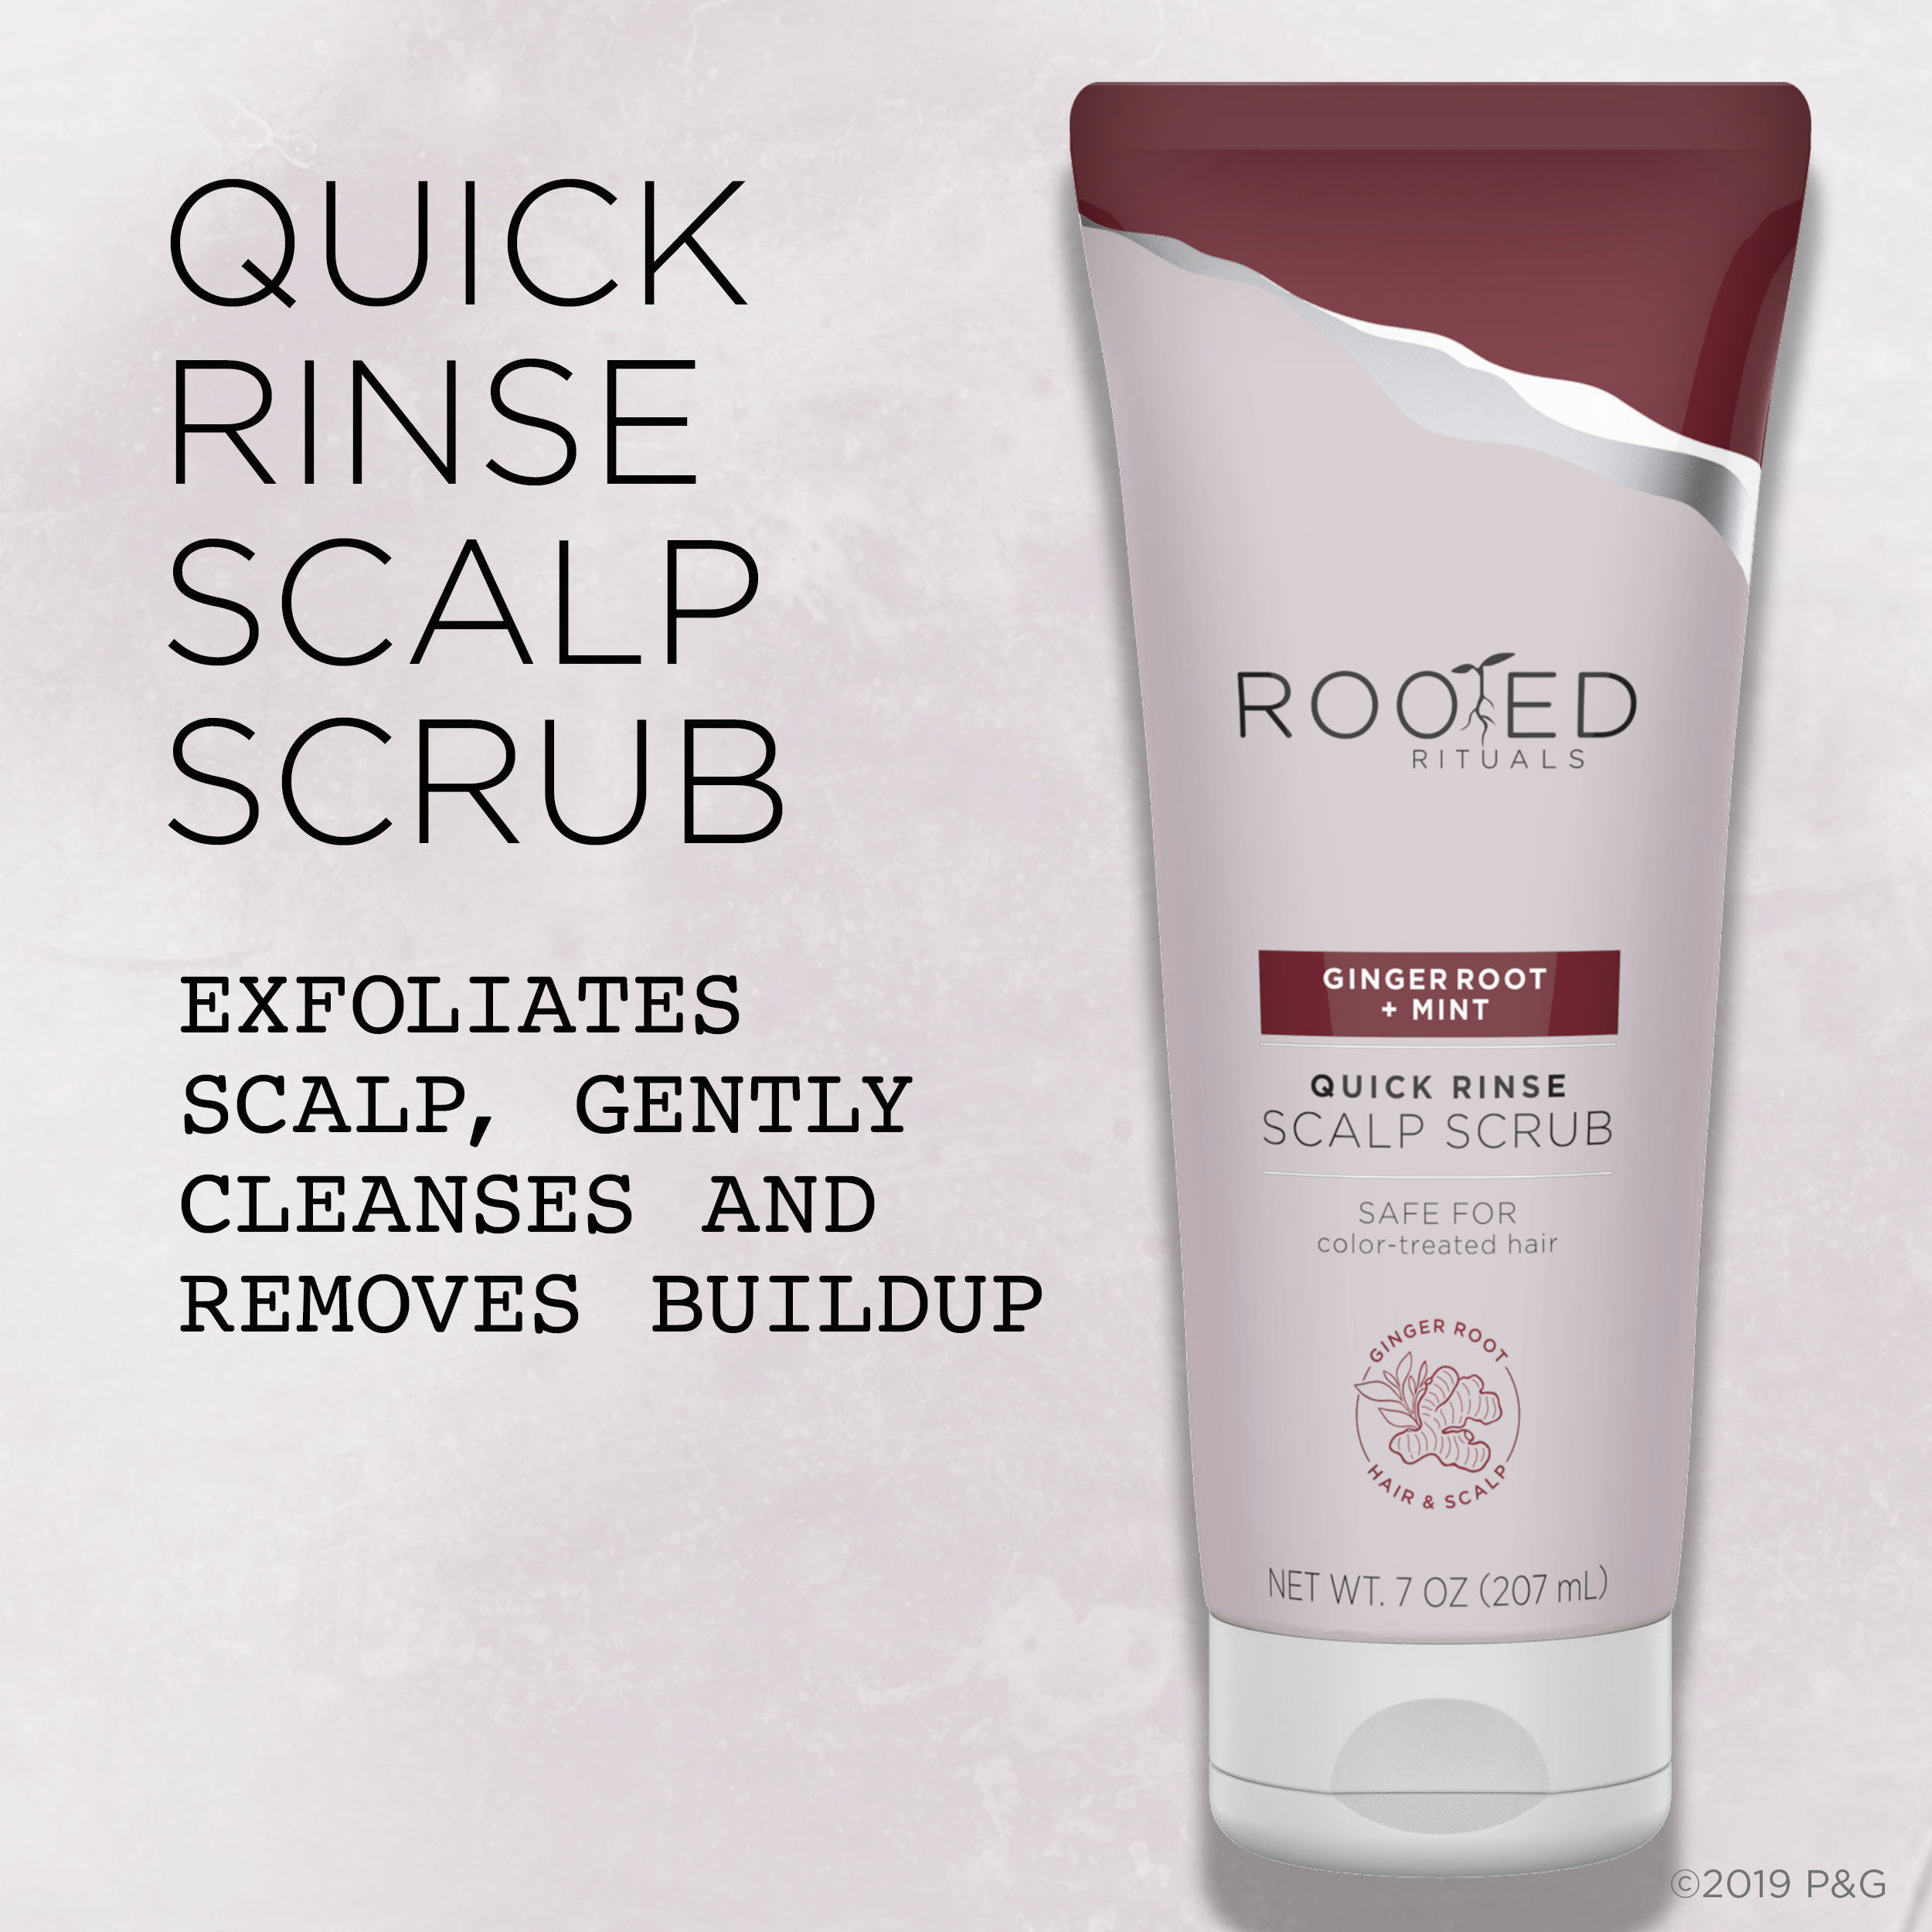 Rooted Rituals Ginger Root and Mint Quick-Rinse Scalp Scrub, 6.7 fl oz - image 5 of 9